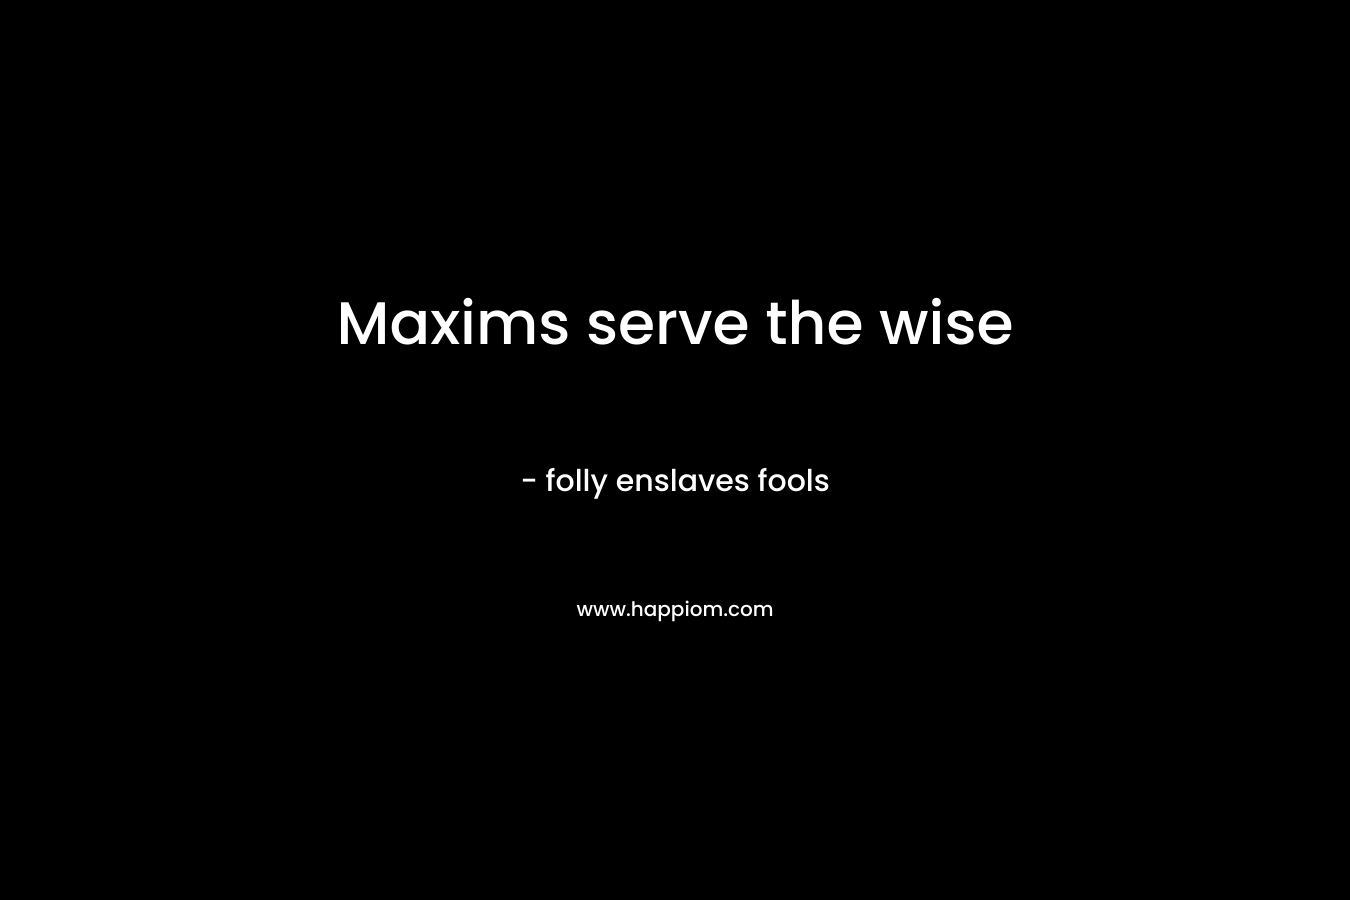 Maxims serve the wise